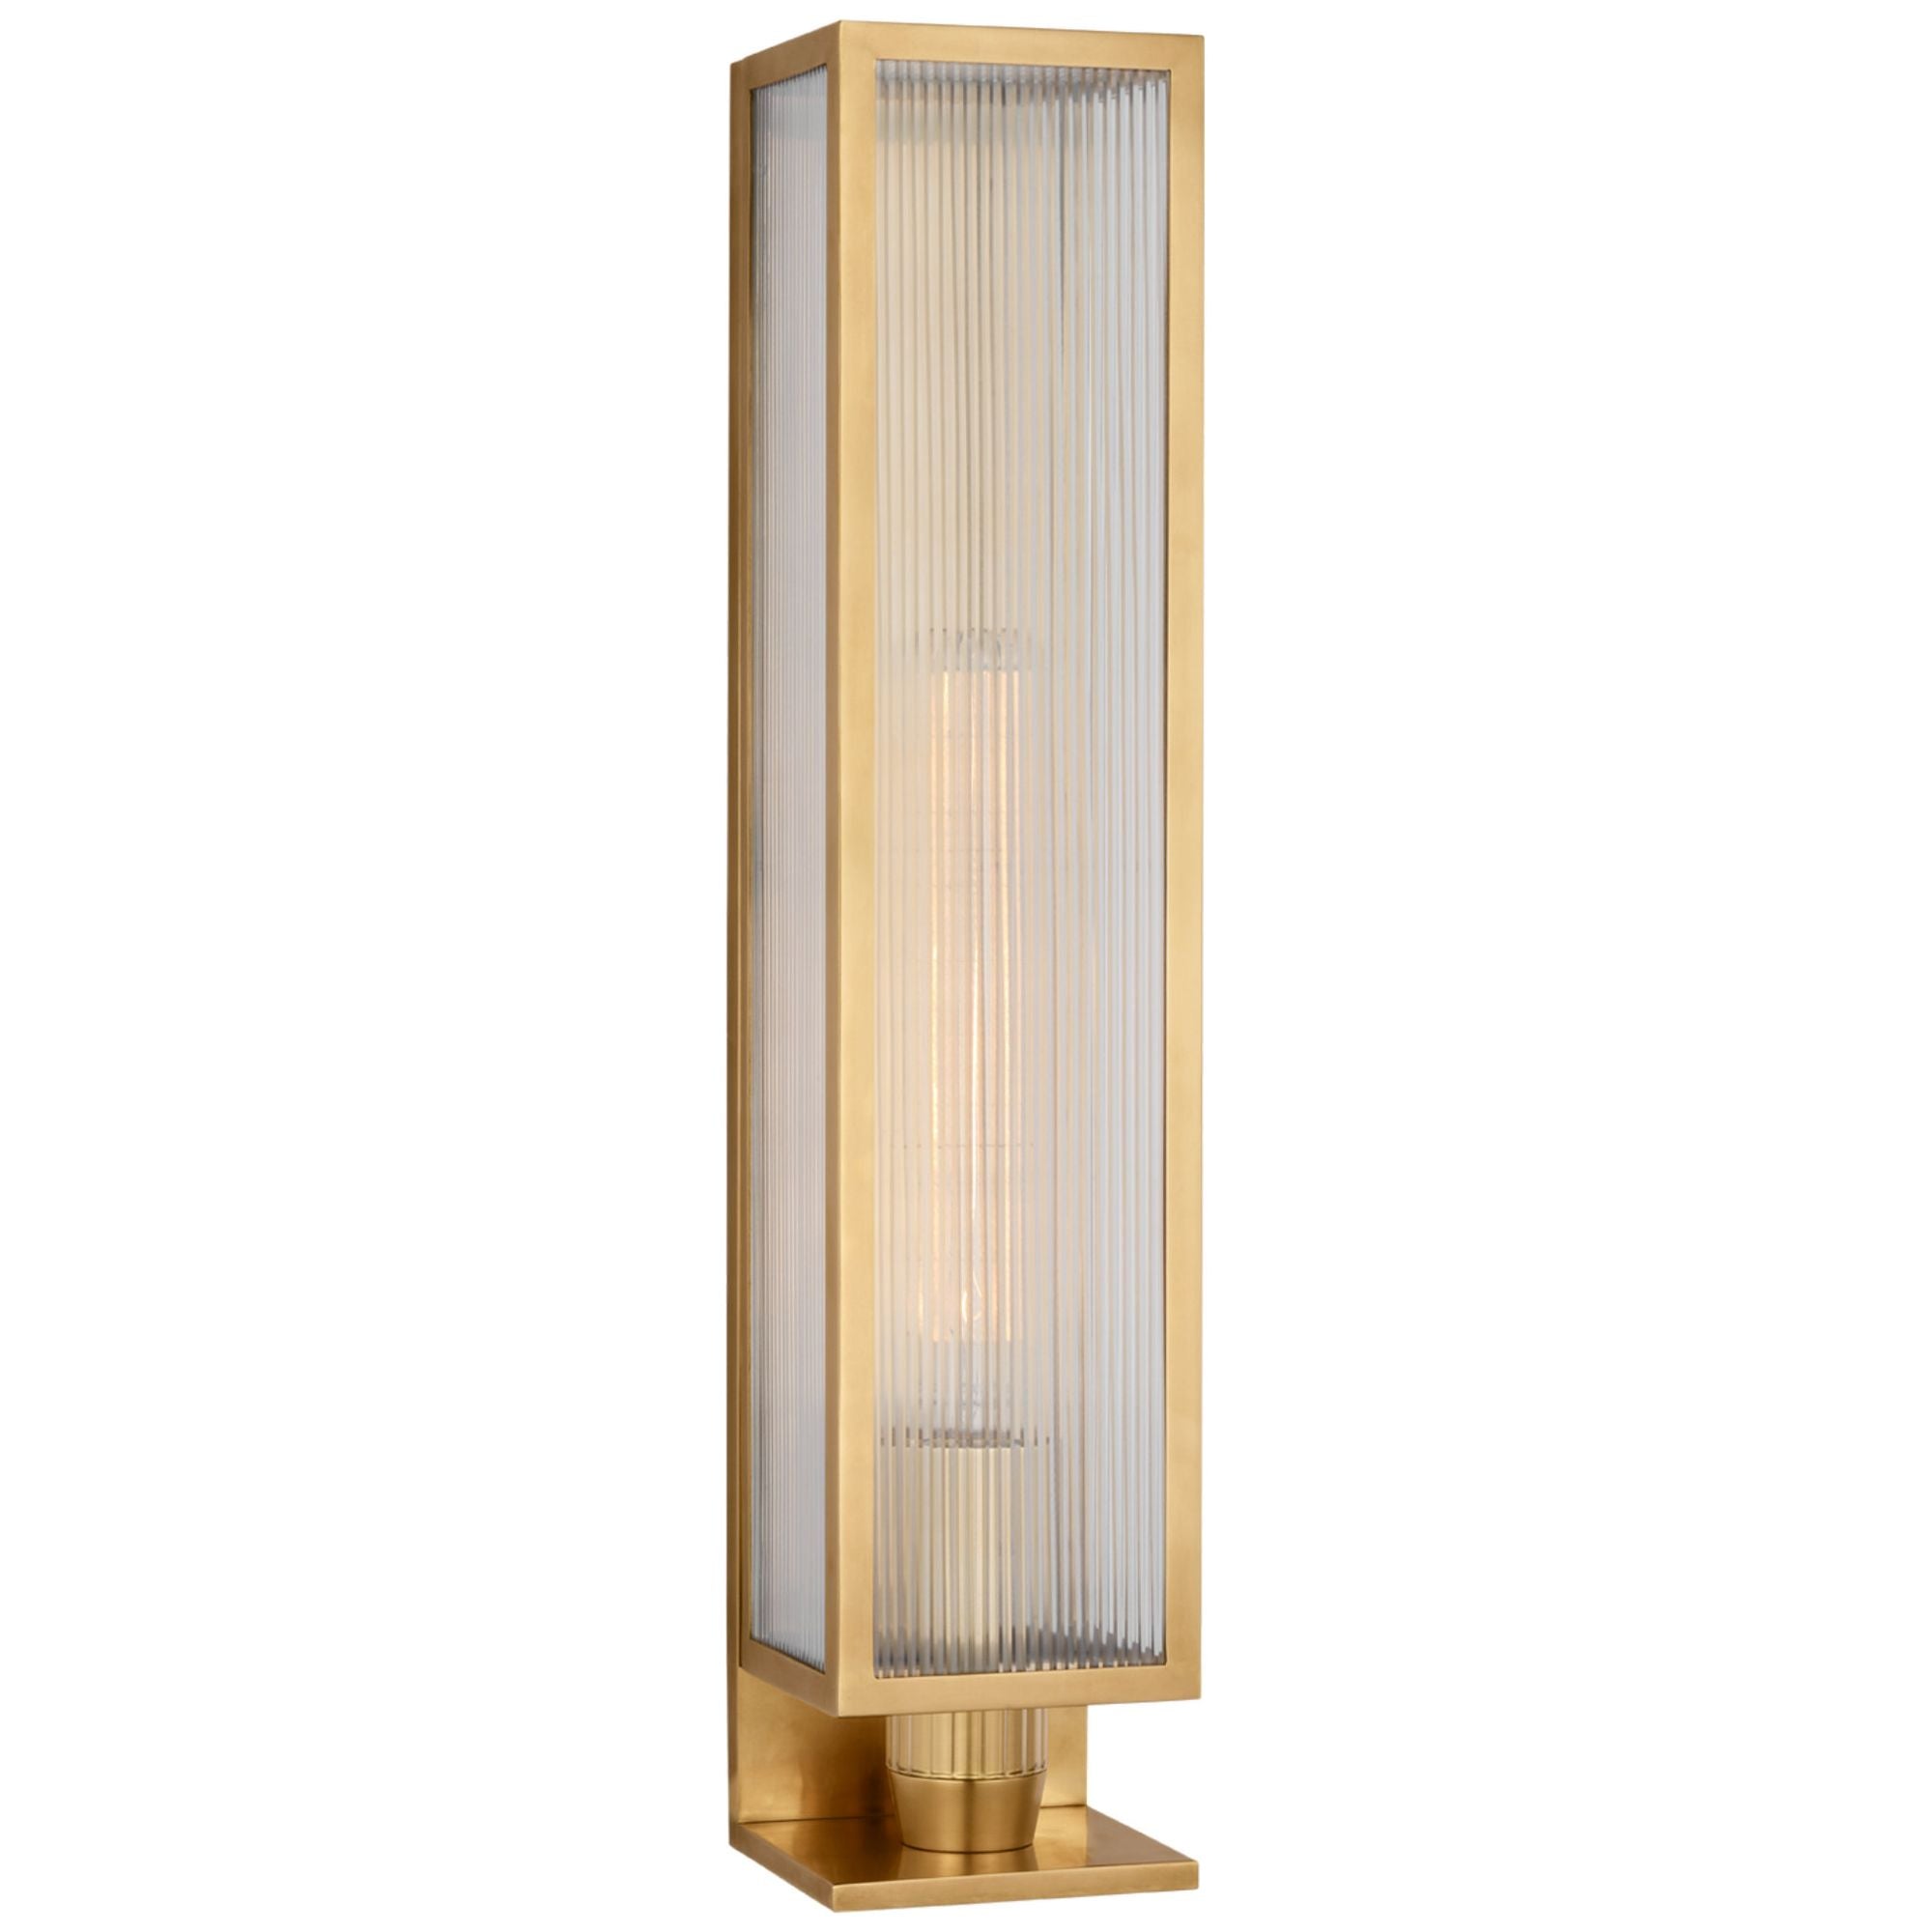 Barbara Barry York 24" Single Box Outdoor Sconce in Soft Brass with Clear Ribbed Glass